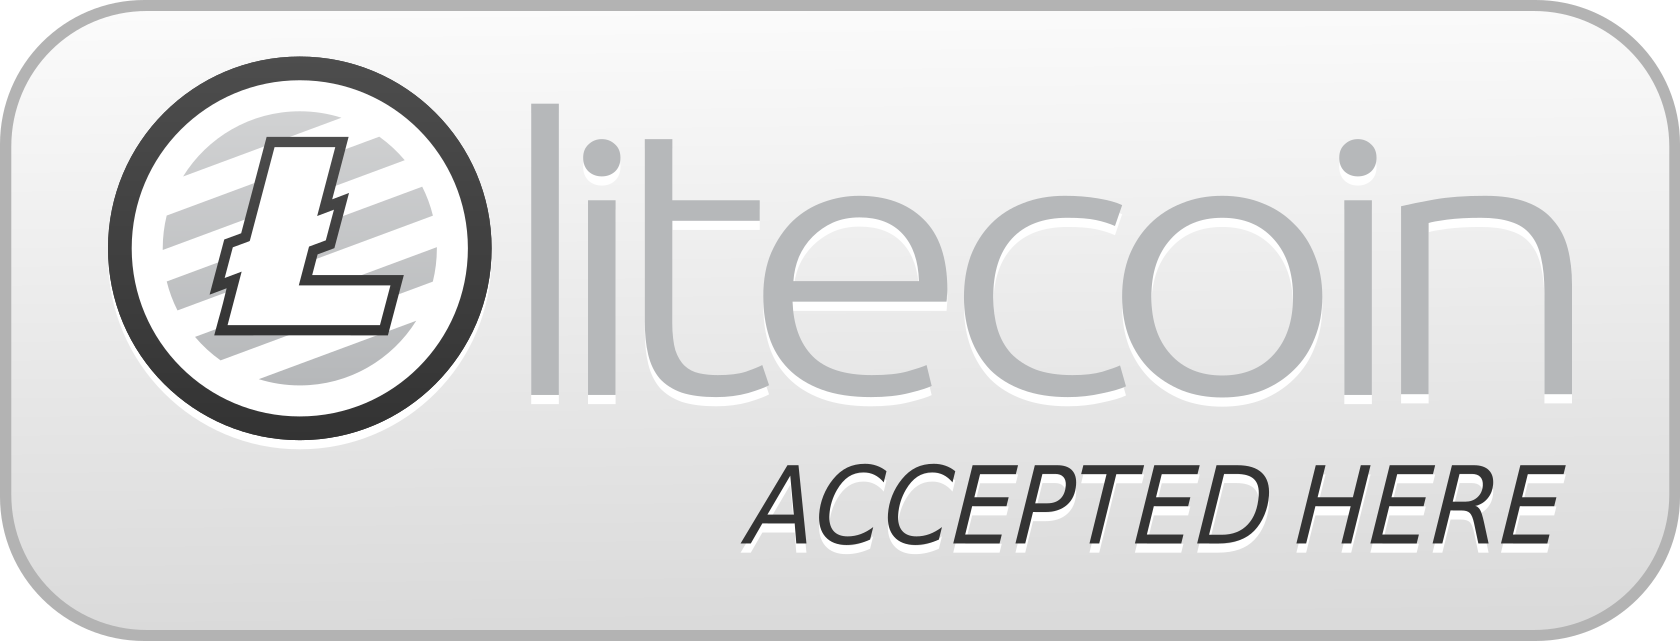 litecoin-accepted-here-01.png